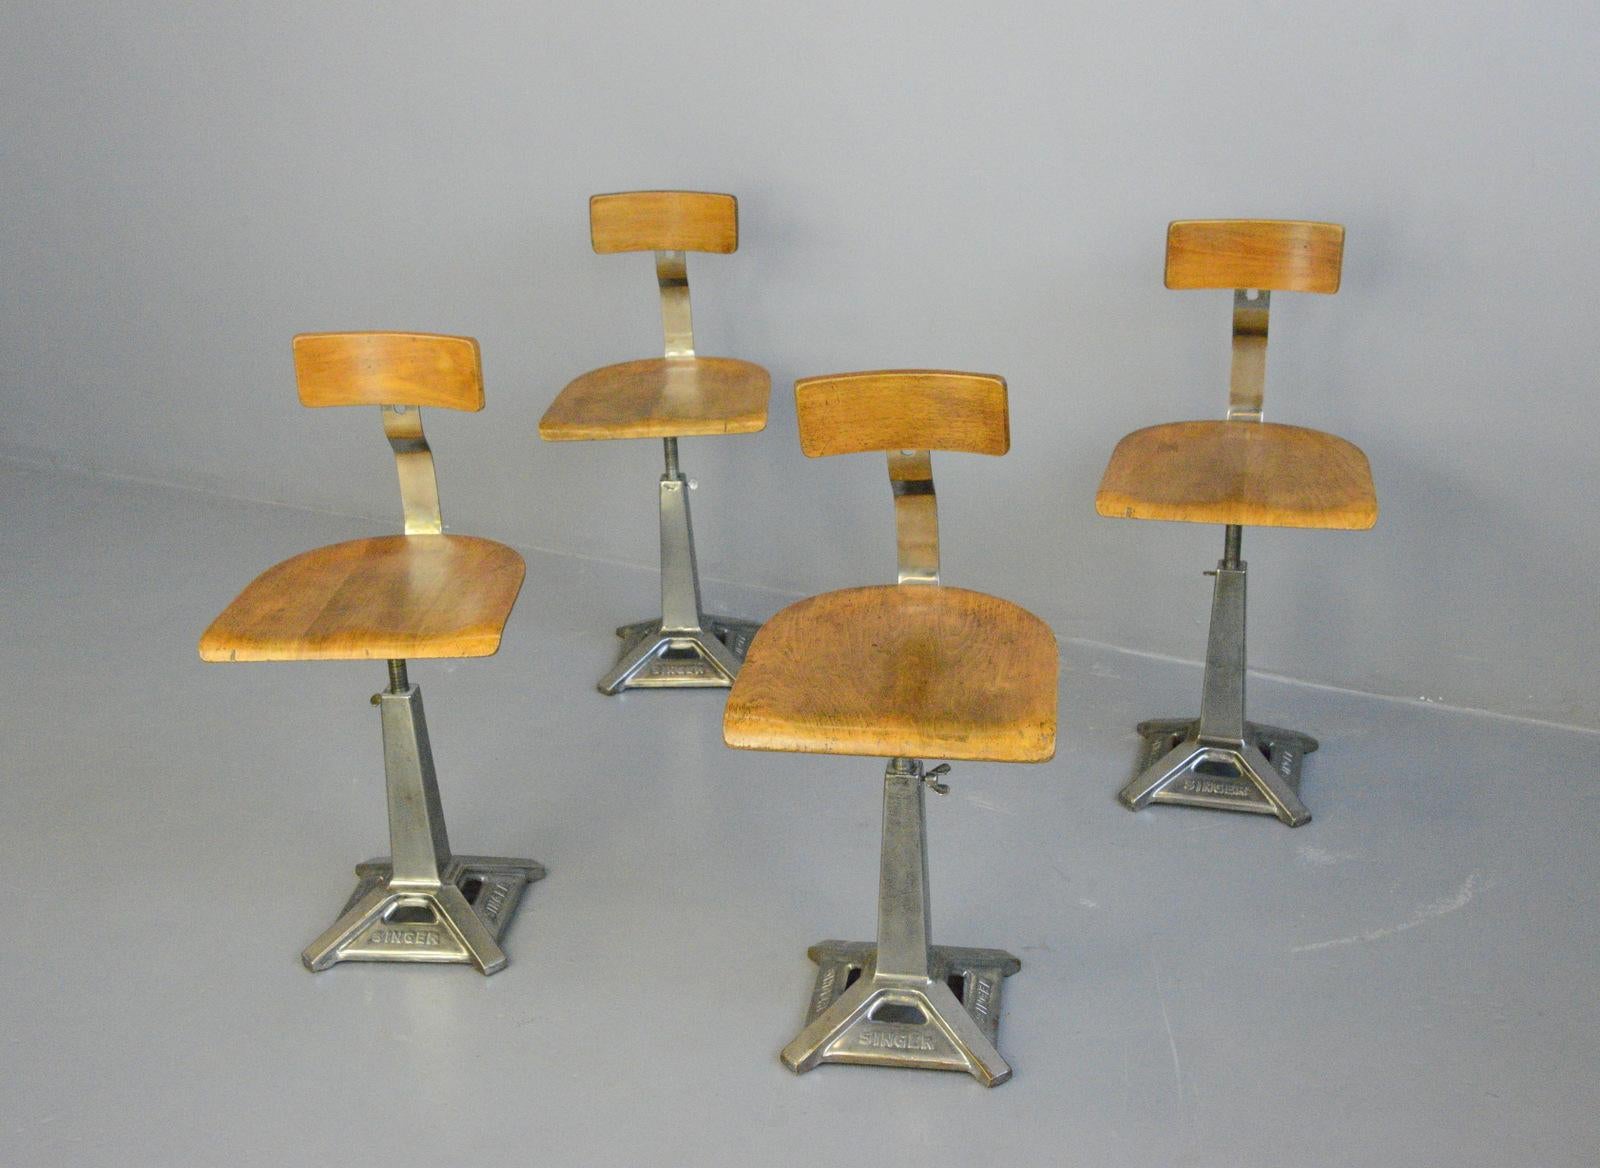 Industrial chairs by Singer Circa 1930s

- Price is per chair (1 remaining)
- Height adjustable
- Cast iron nickel plated bases
- Ply seats and back rests
- Relief 